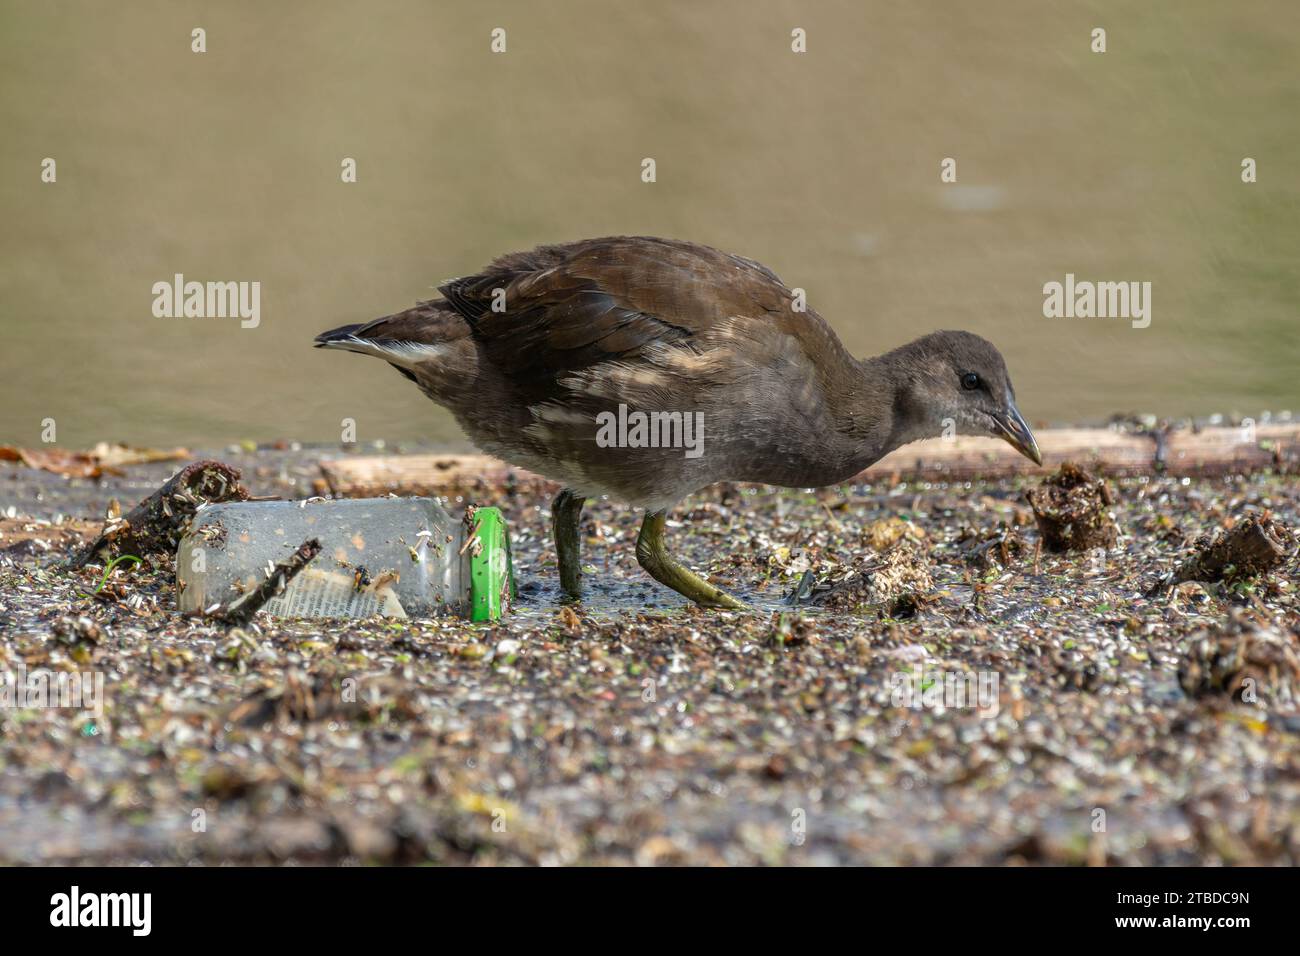 Young common moorhen (Gallinula chloropus) walking in a river polluted by a glass jar. Bas-Rhin, Alsace, Grand Est, France, Europe. Stock Photo